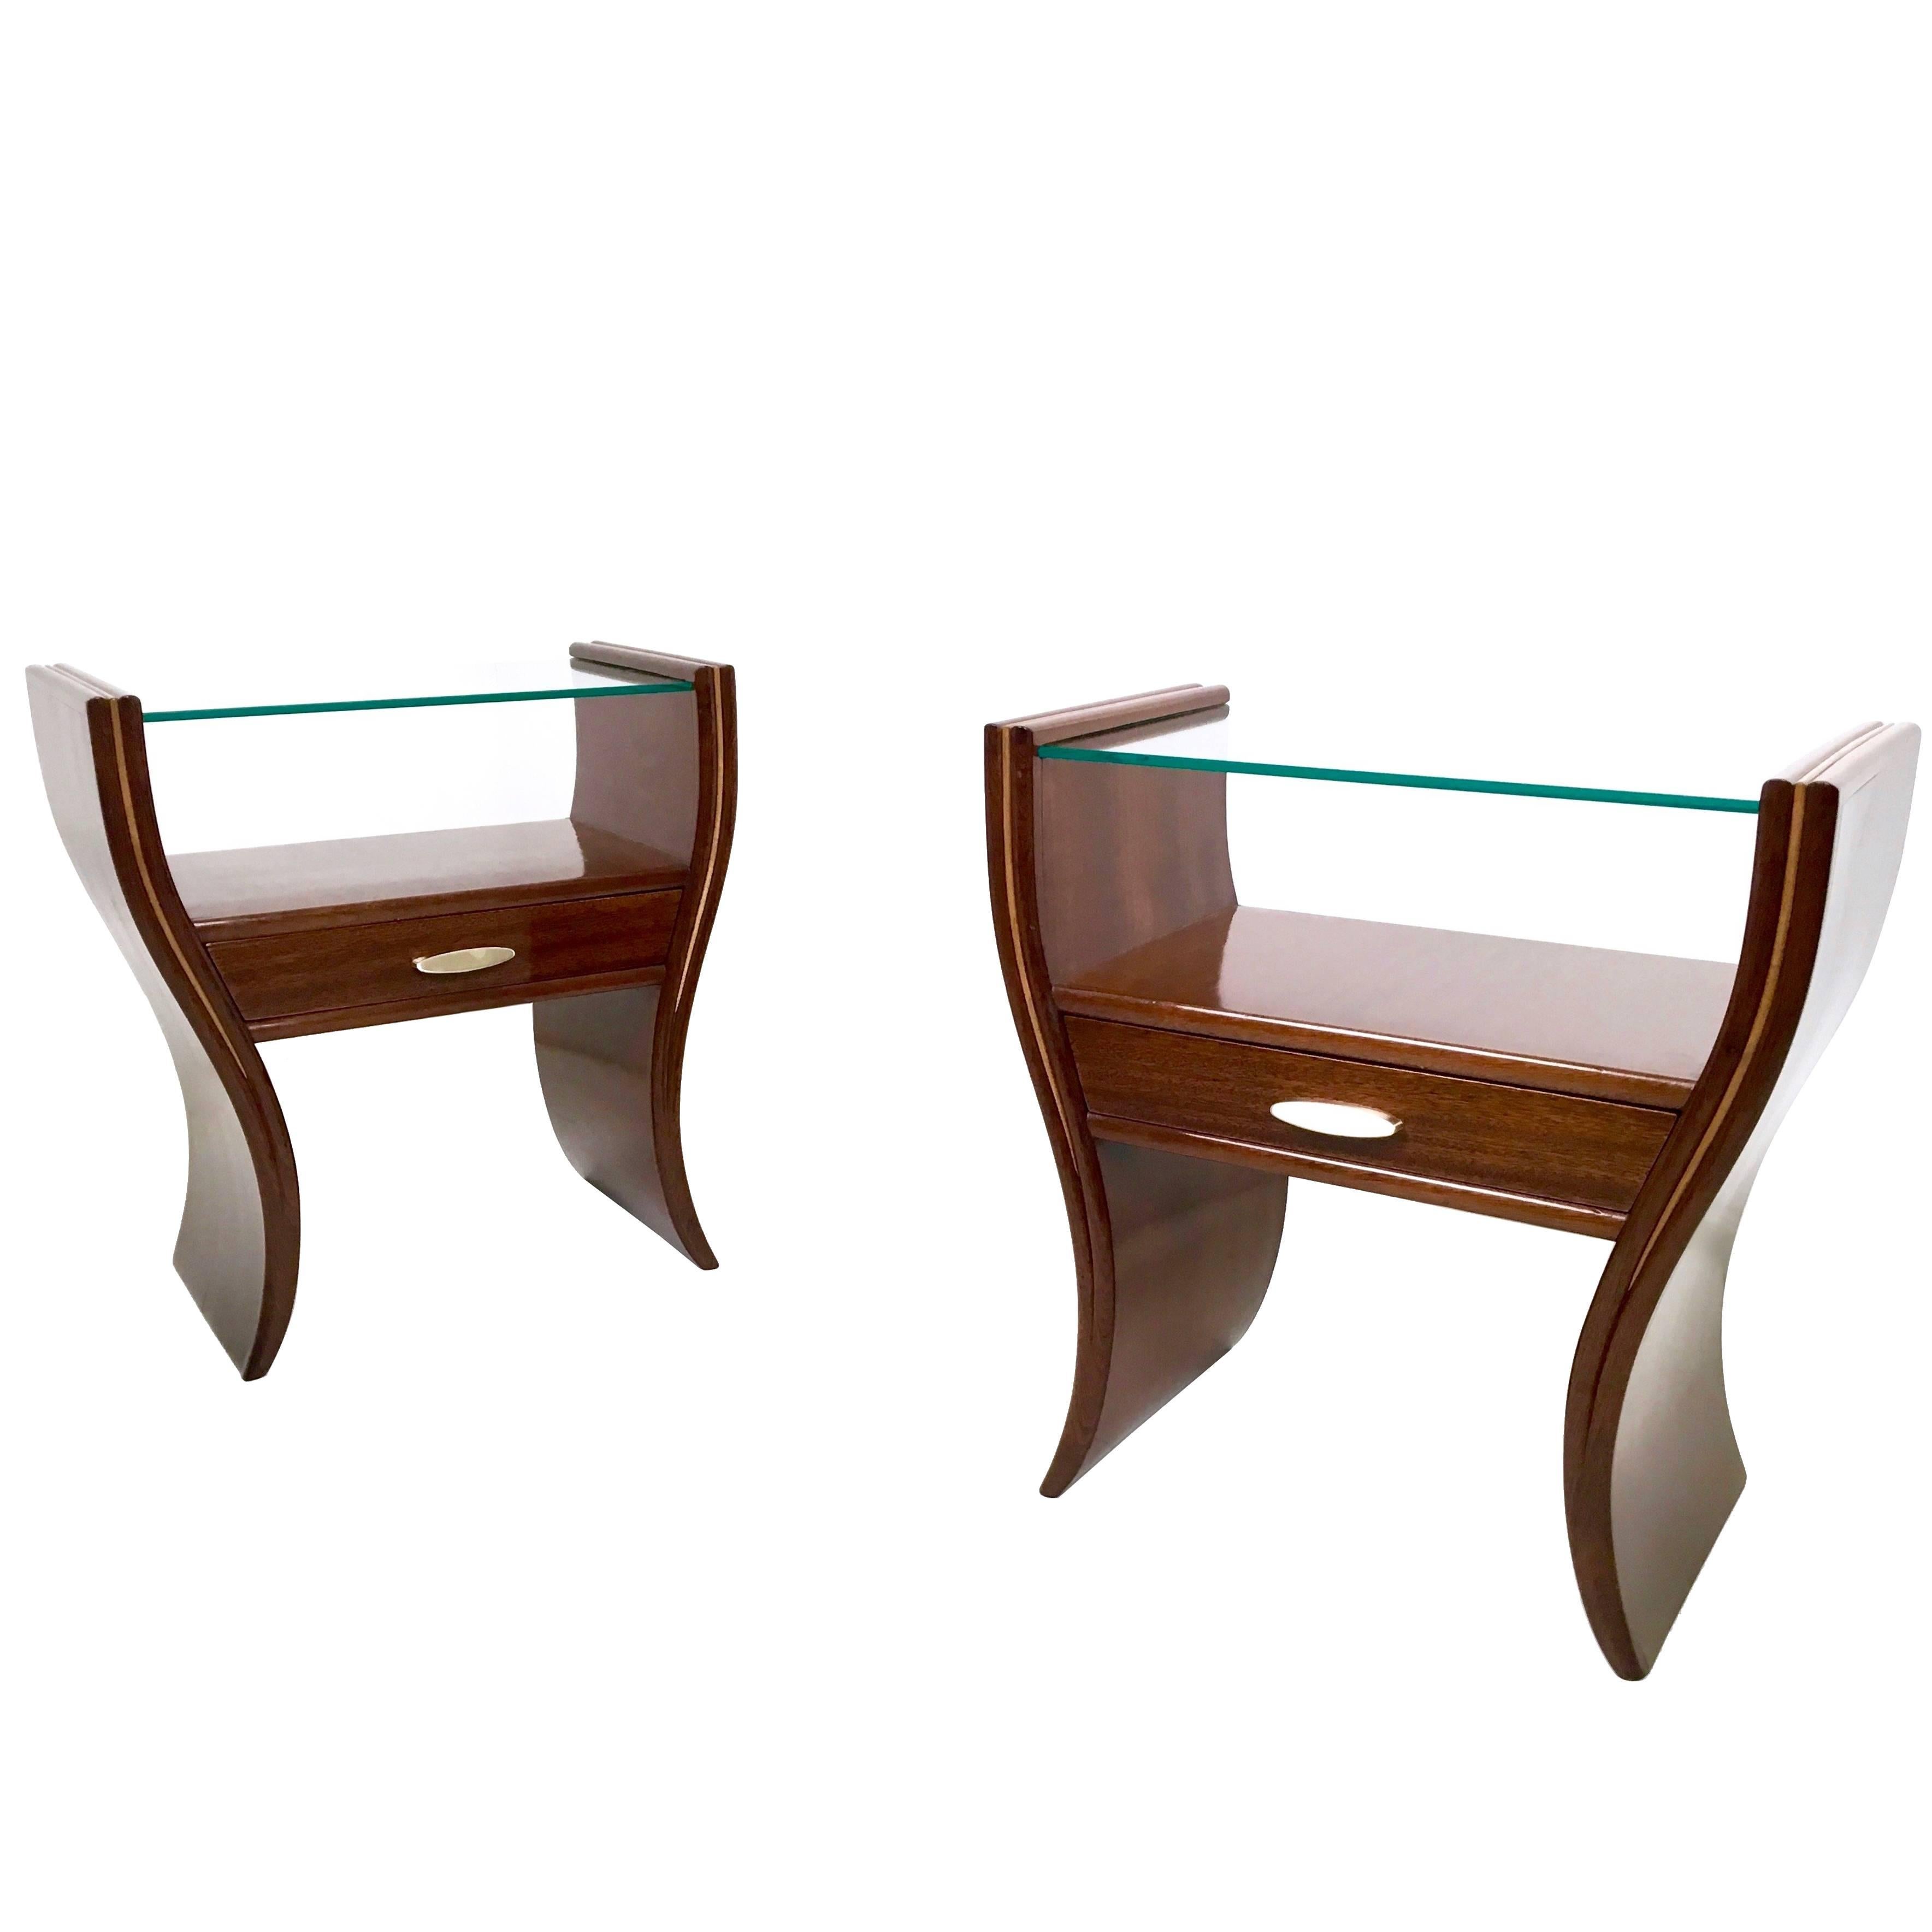 Pair of Wonderful Bedside Tables Ascribable to Guglielmo Ulrich, 1940s-1950s